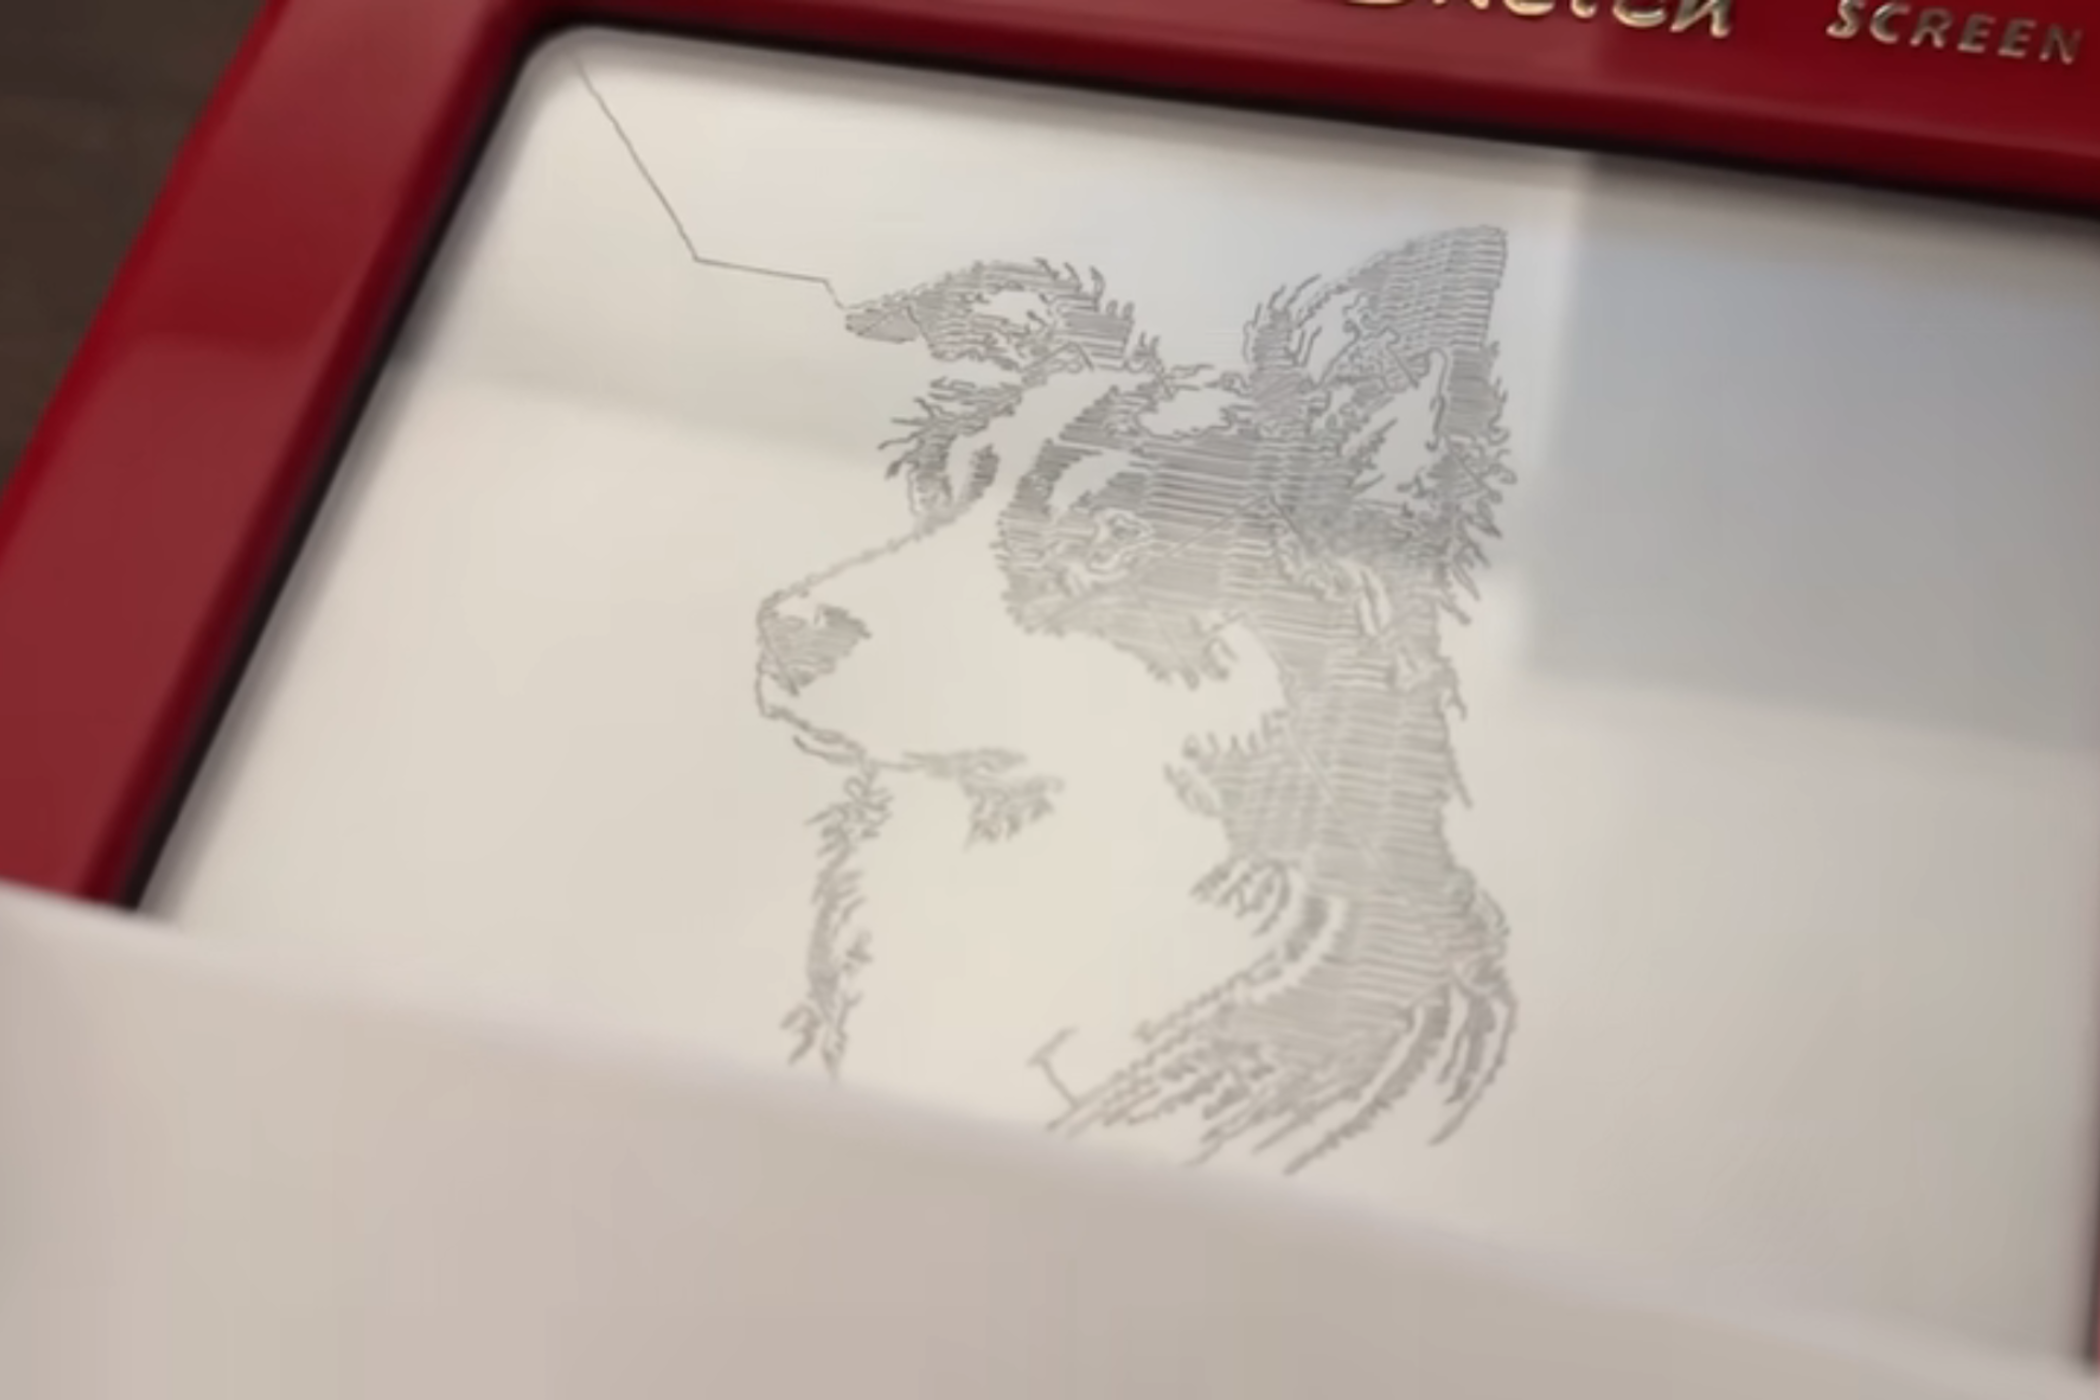 This awesome Raspberry Pi Etch-a-Sketch can draw any image you want without the frustration